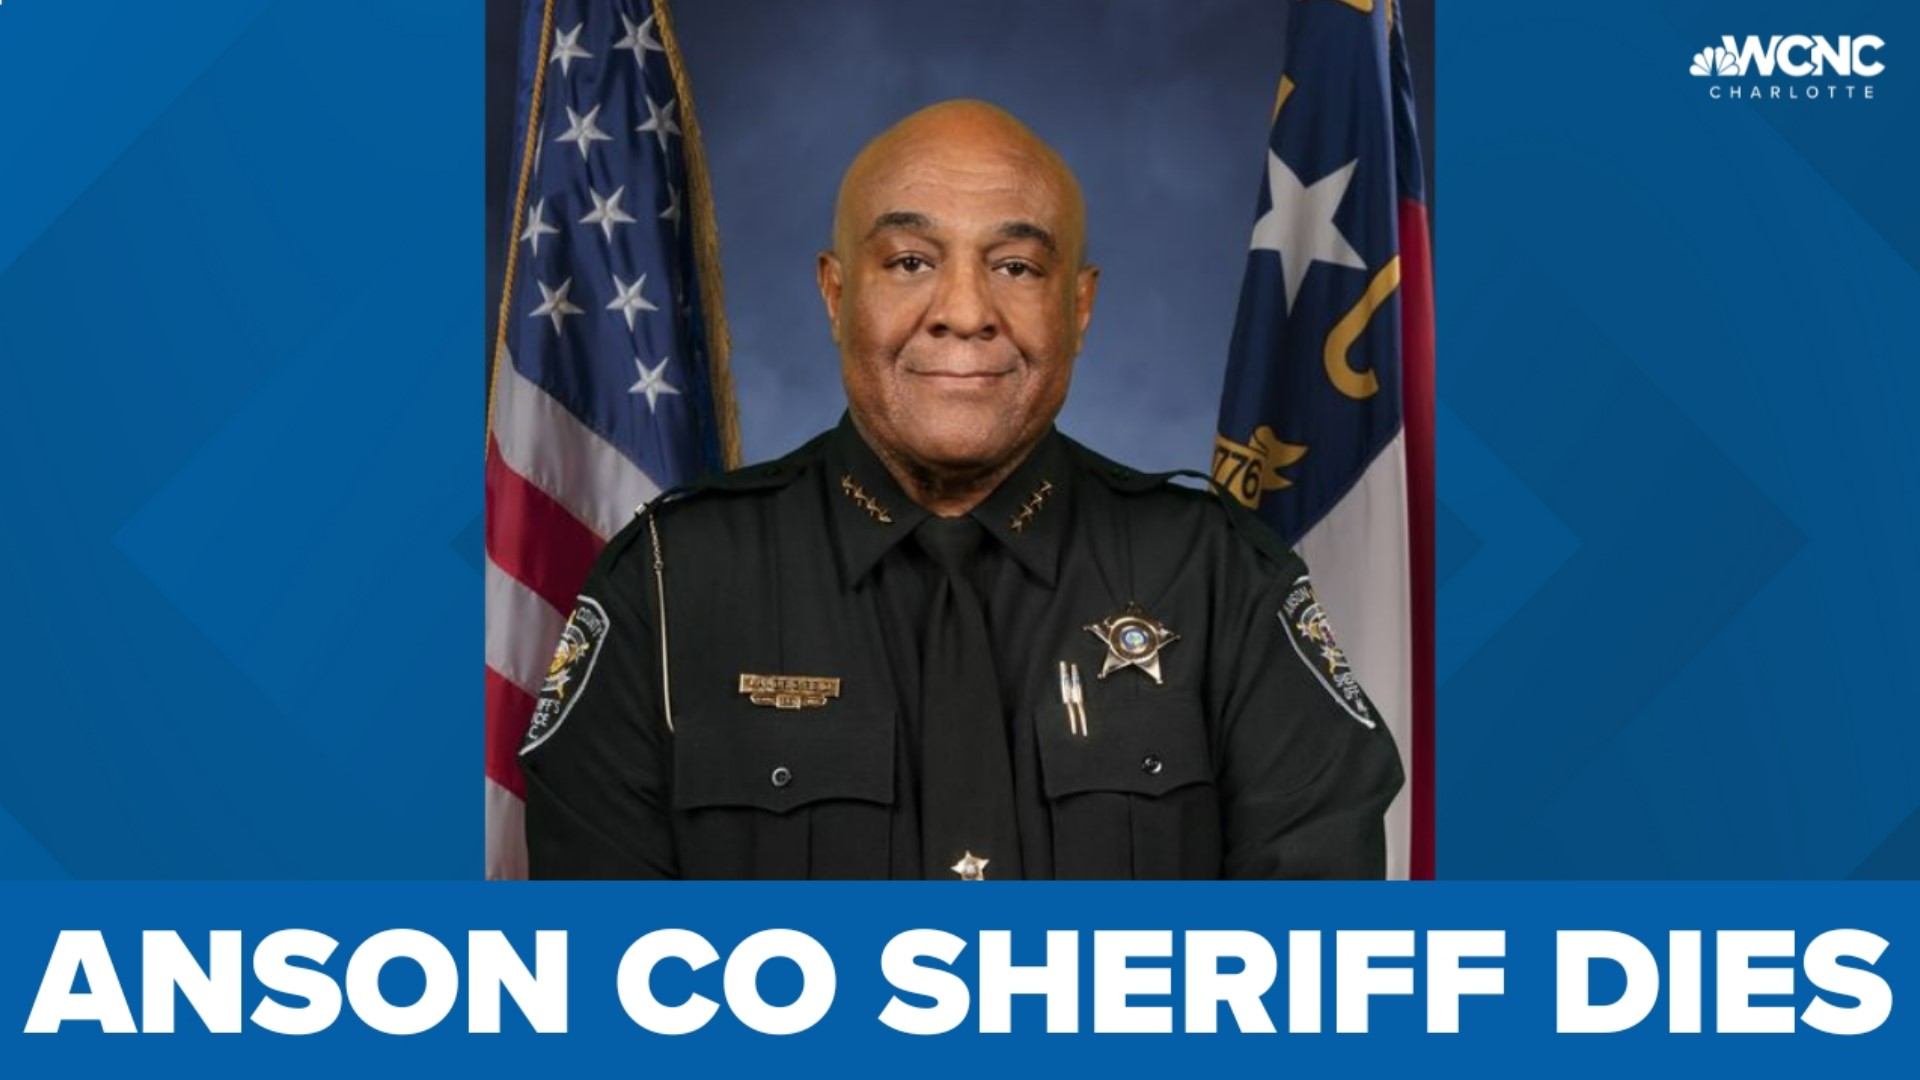 Anson County Sheriff Landric Reid died Wednesday, according to an announcement from the North Carolina Sheriff's Association.